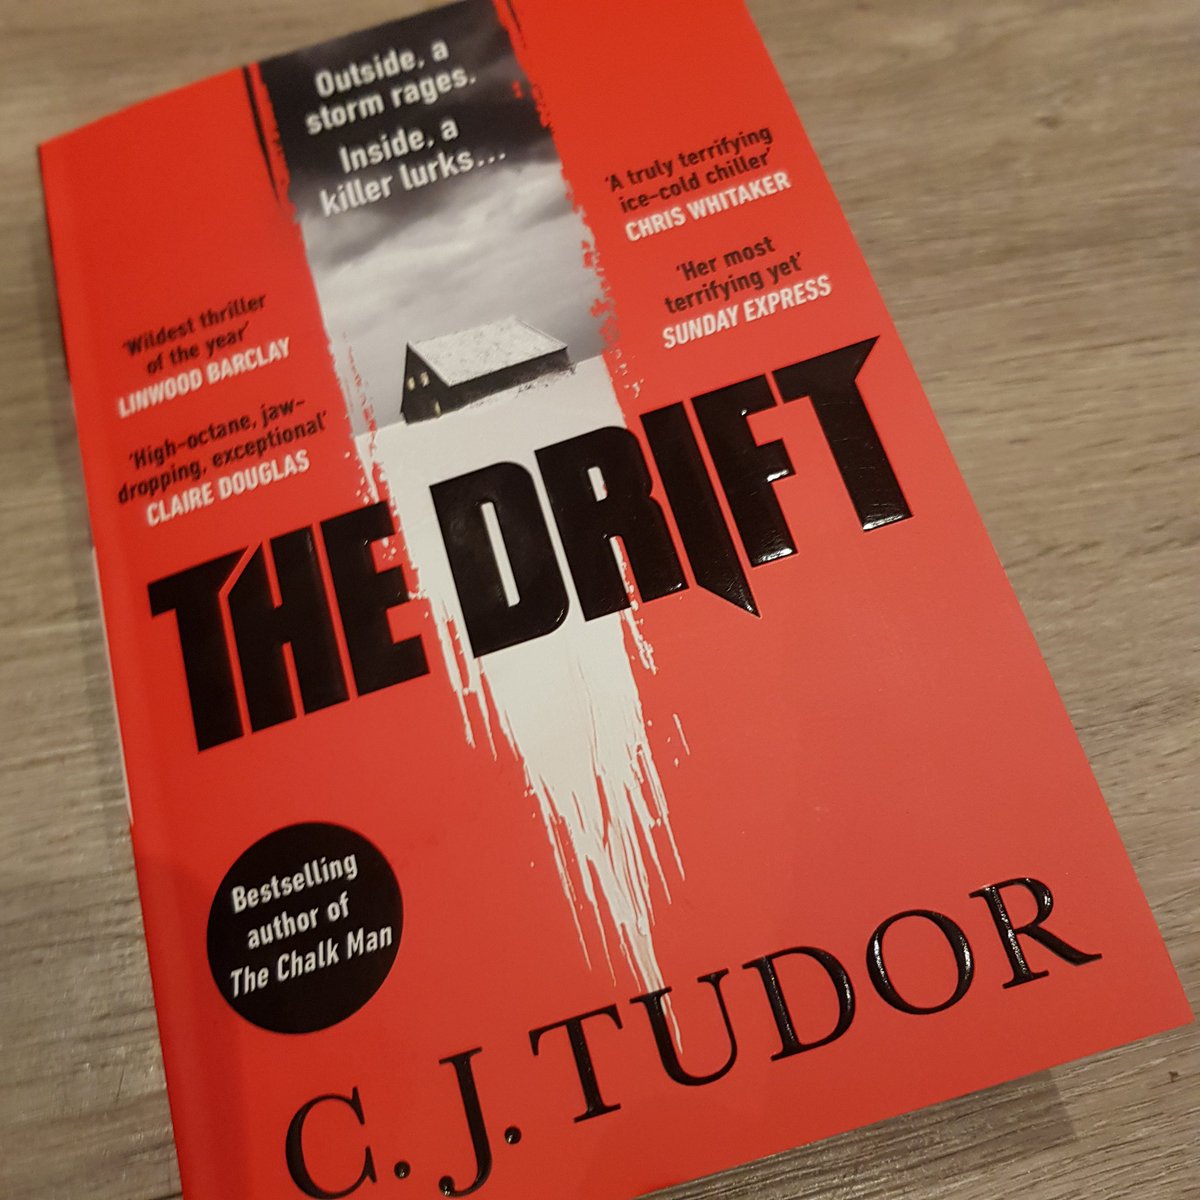 Went to Sainsburys for goose fat and came out with a @cjtudor. Looking forward to a gentle and uplifting Christmassy read. 😱 #amreading #TheDrift